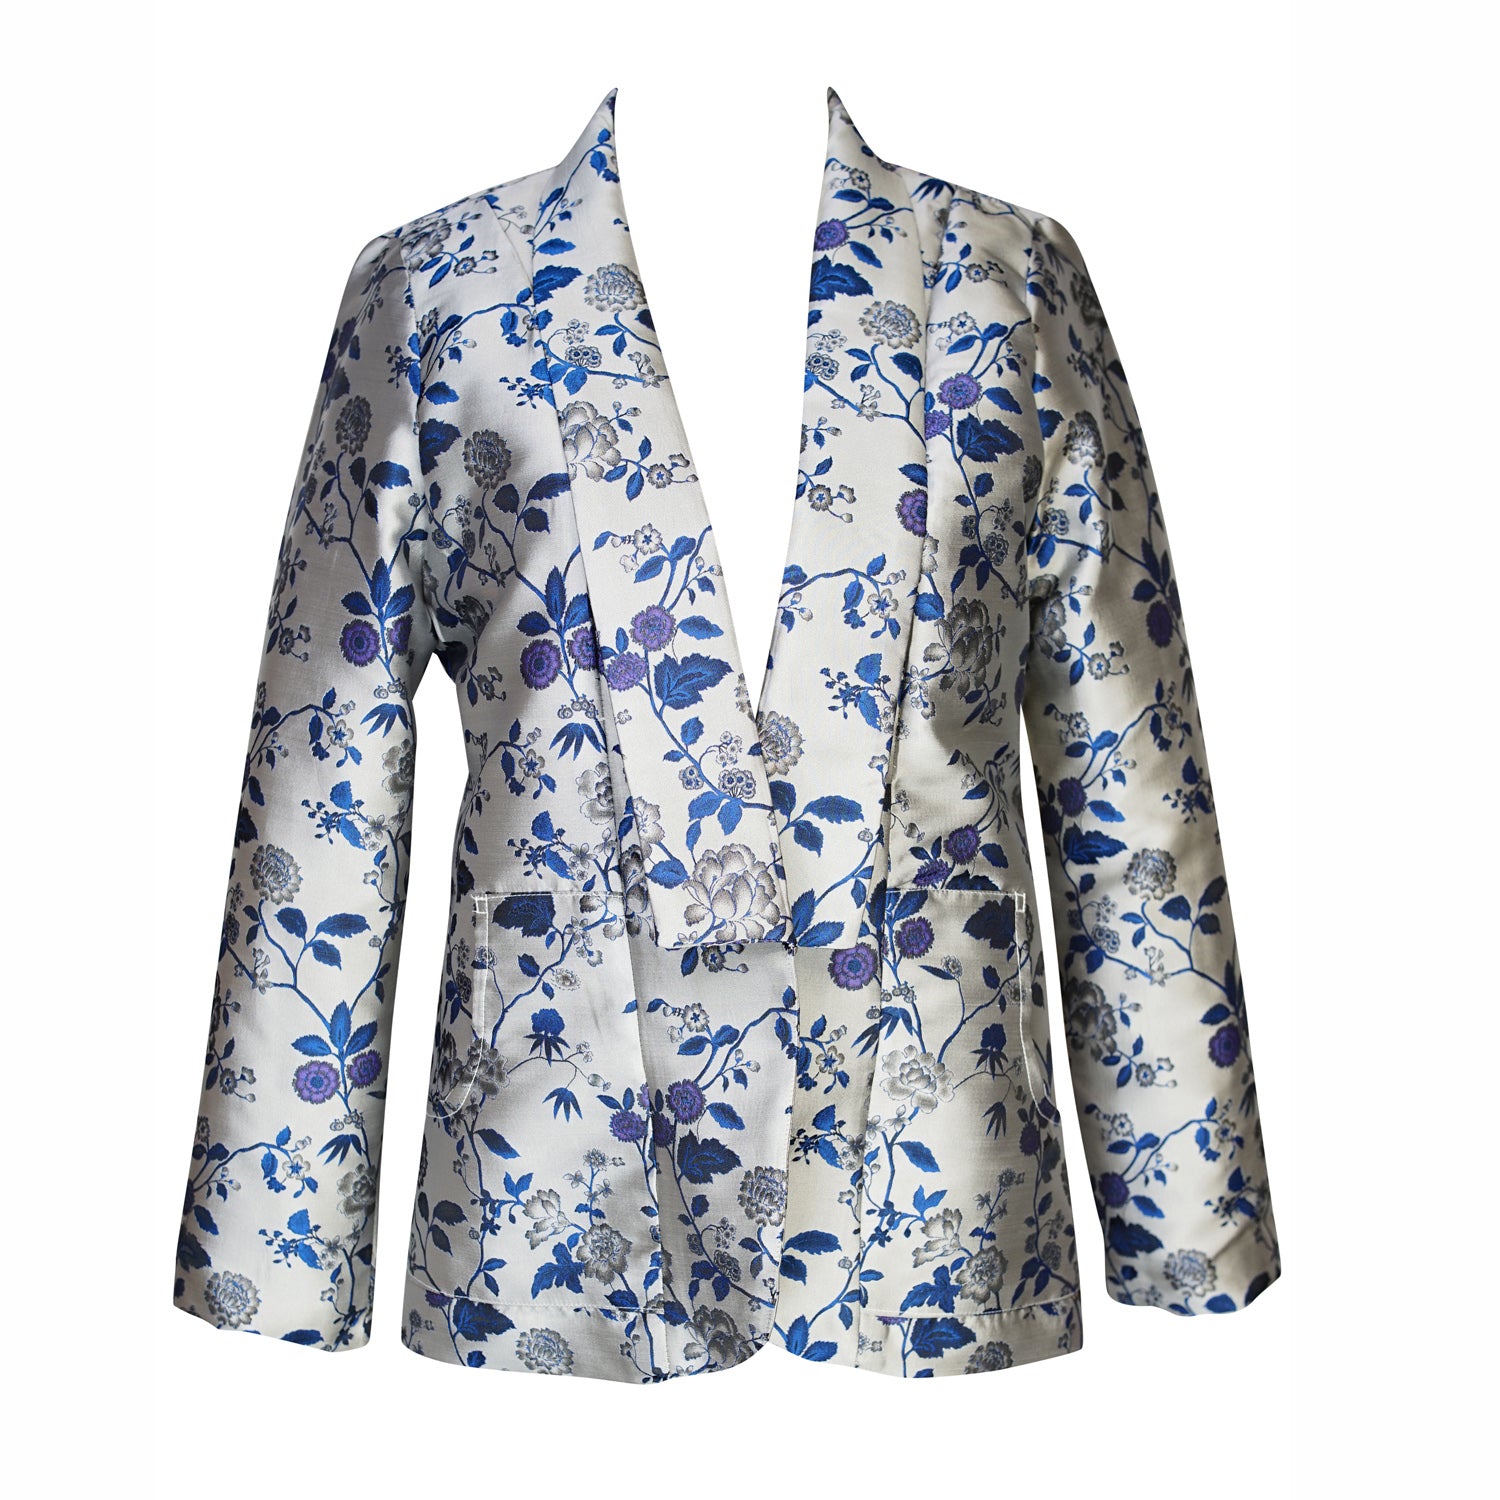 This cool-toned blazer features a silver and blue floral print with a shawl collar and pockets. Sleeve hem is slightly cropped above wrists. 